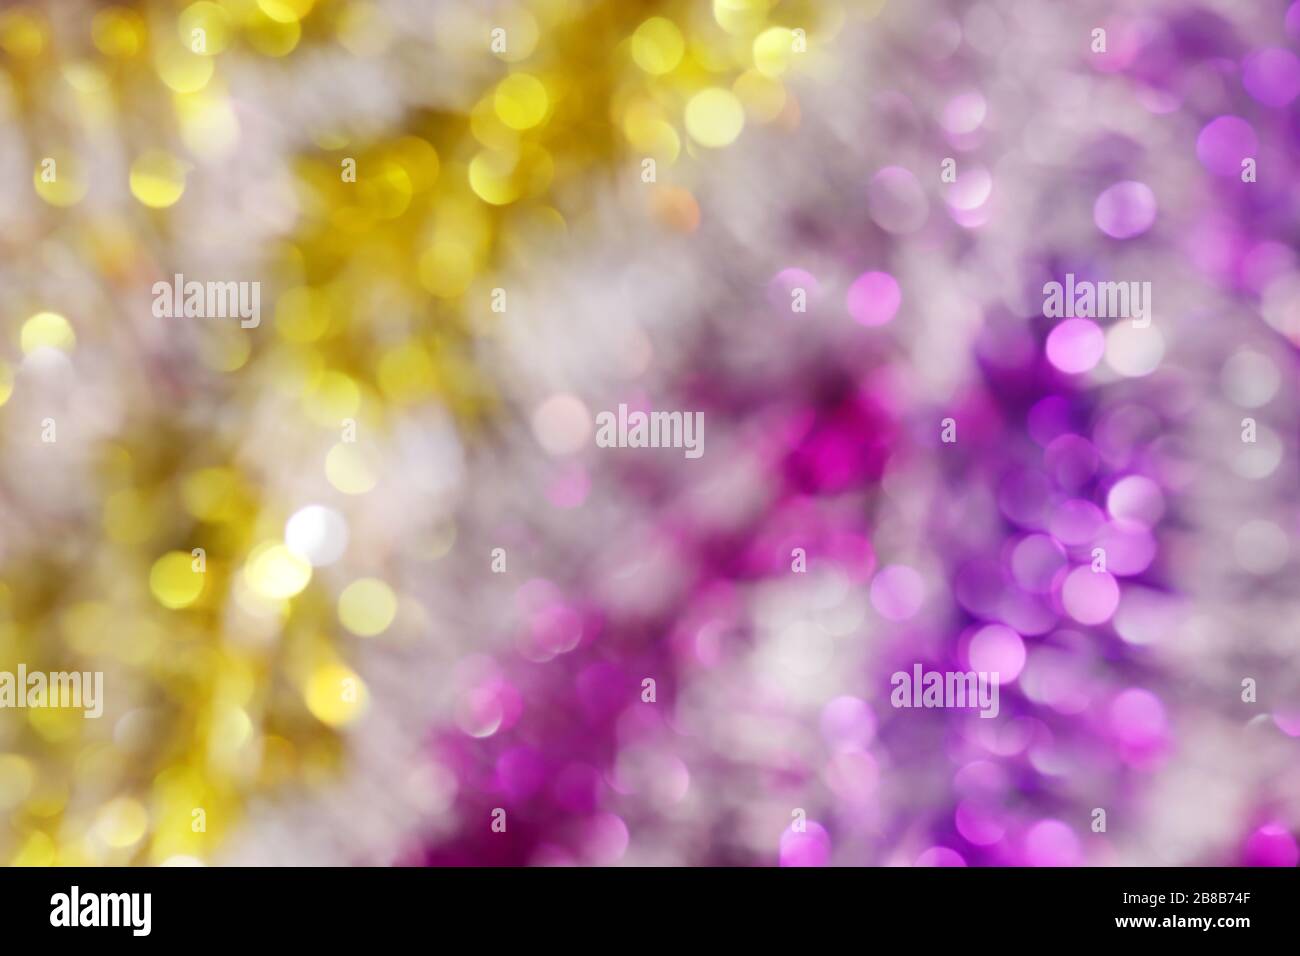 blurred picture yellow gold and purple bokeh colorful glittering for merry christmas and happy new year festival background design Stock Photo